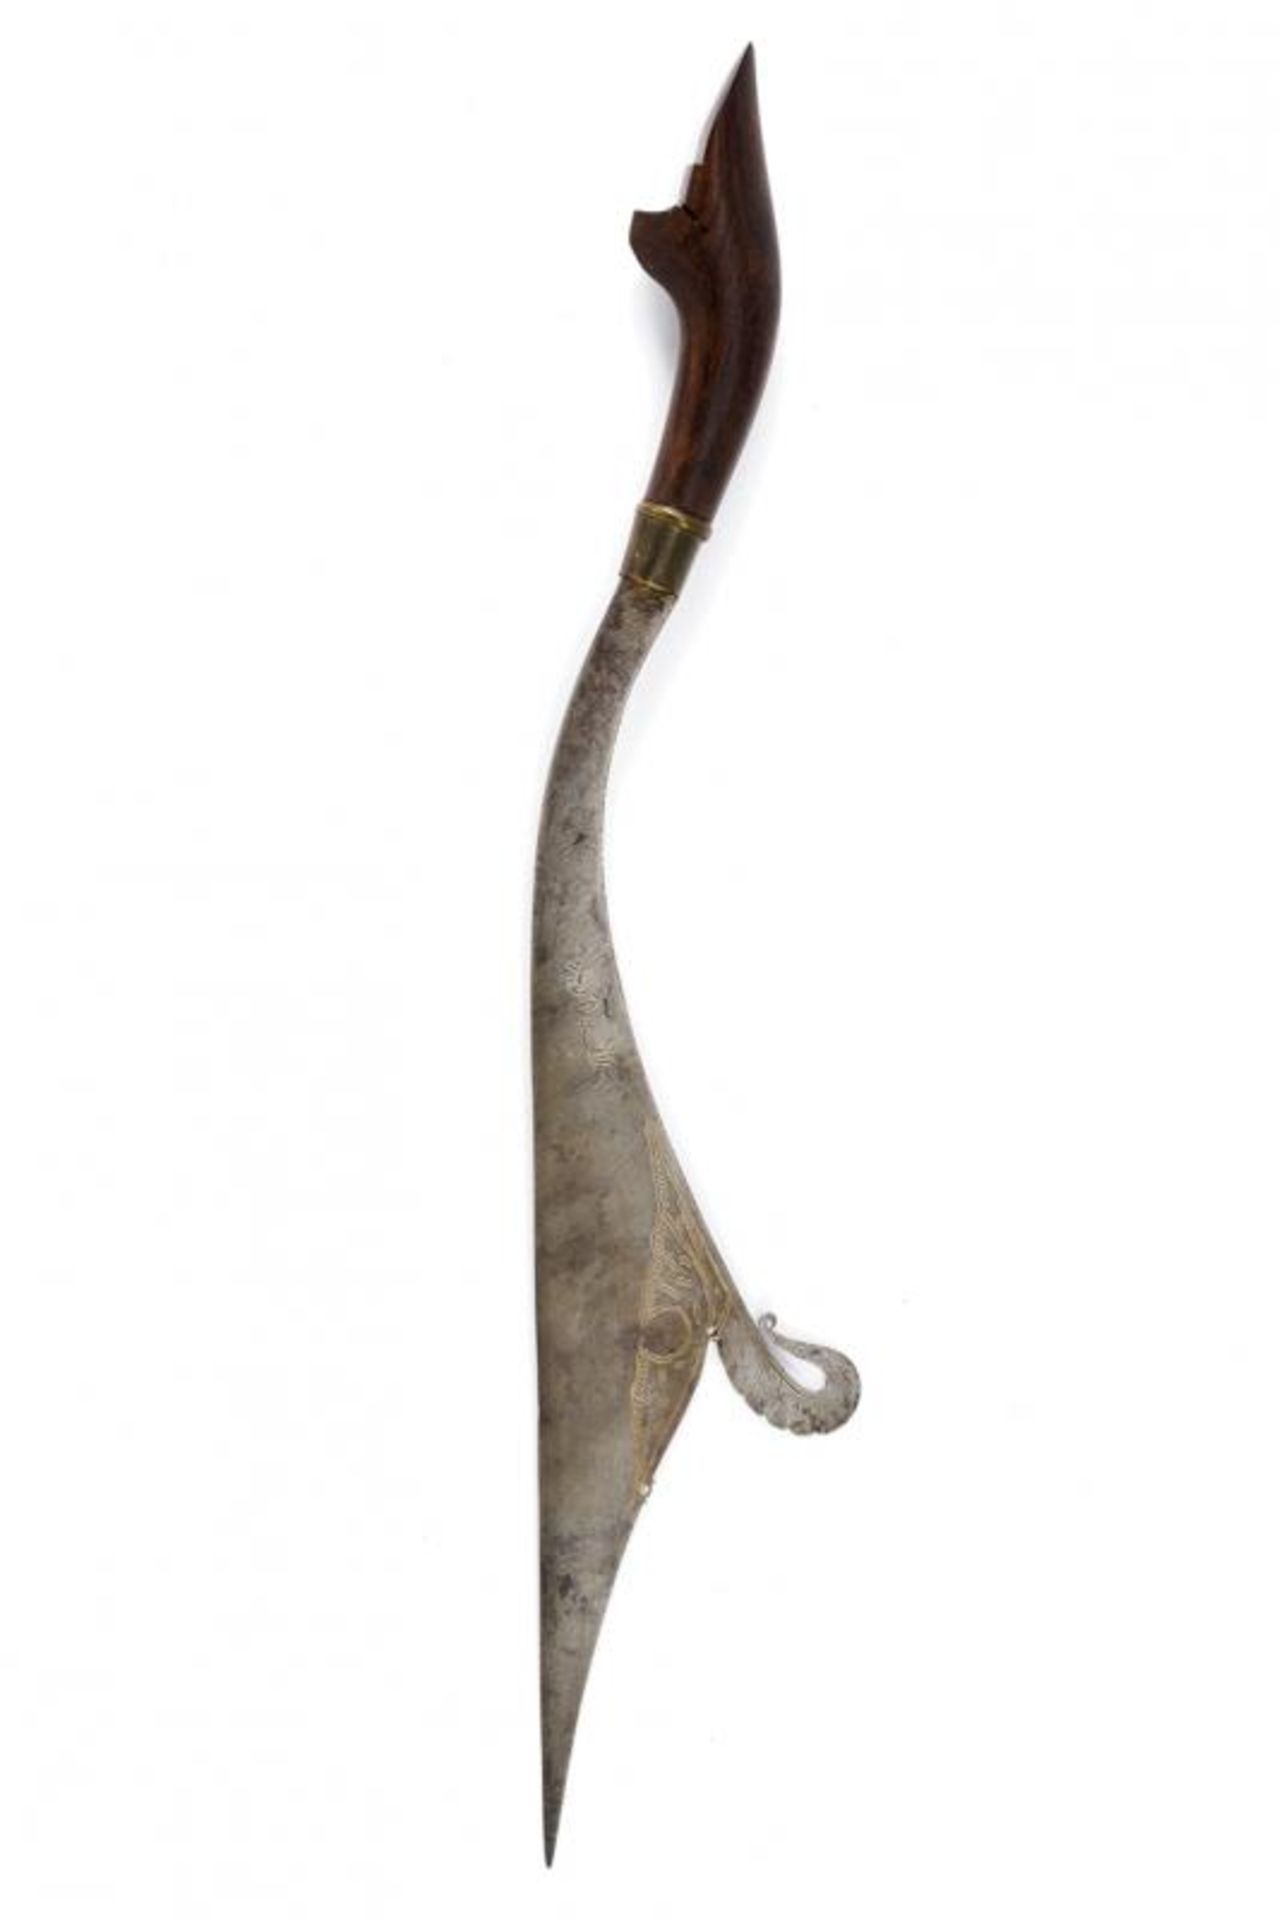 A short sword (karis) of the Sulu tribe